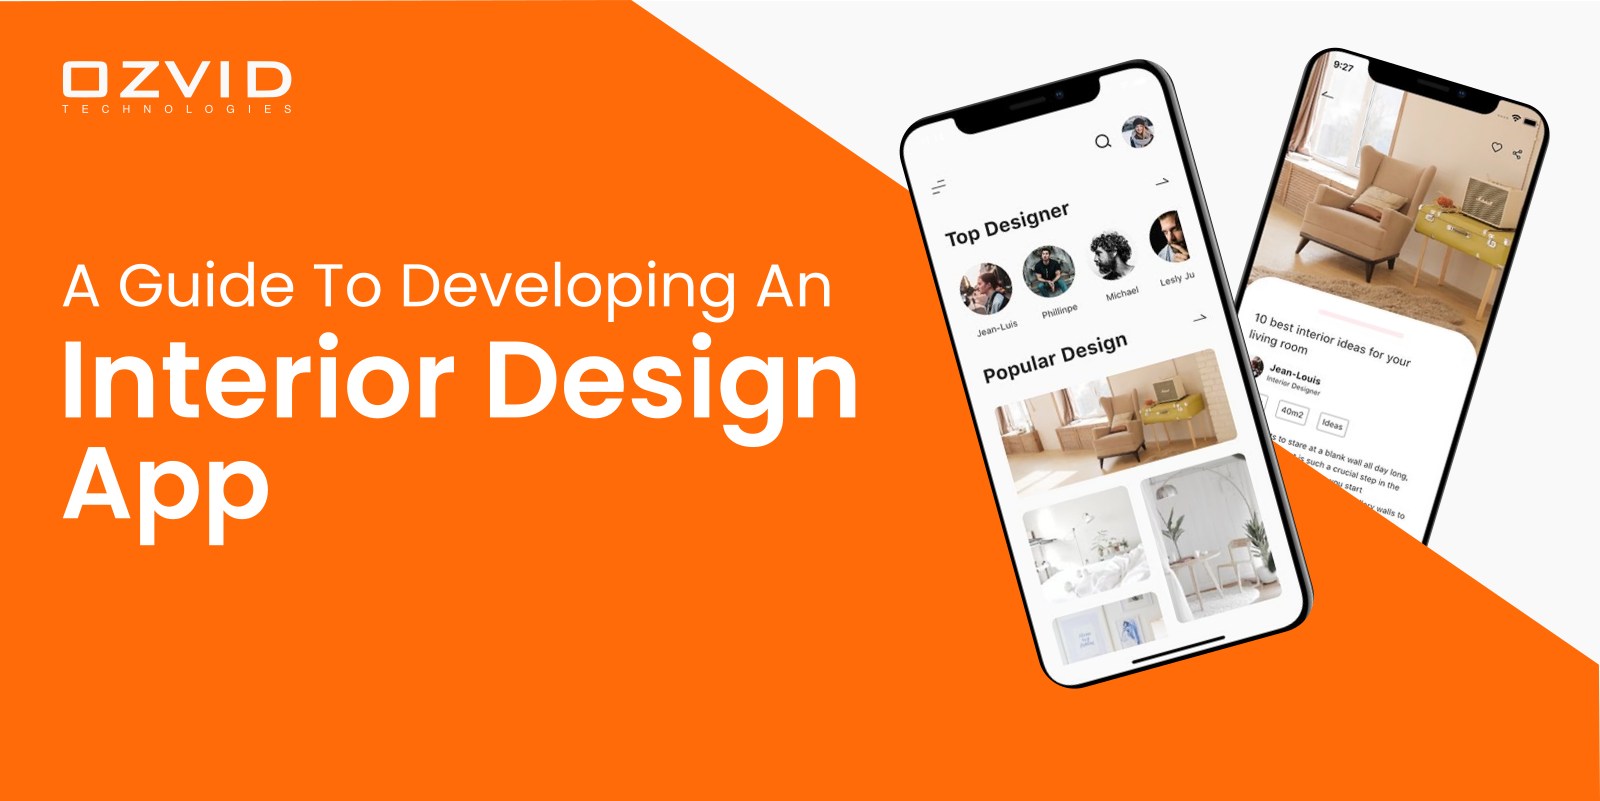 A Step-by-step Guide To Developing An Interior Design App